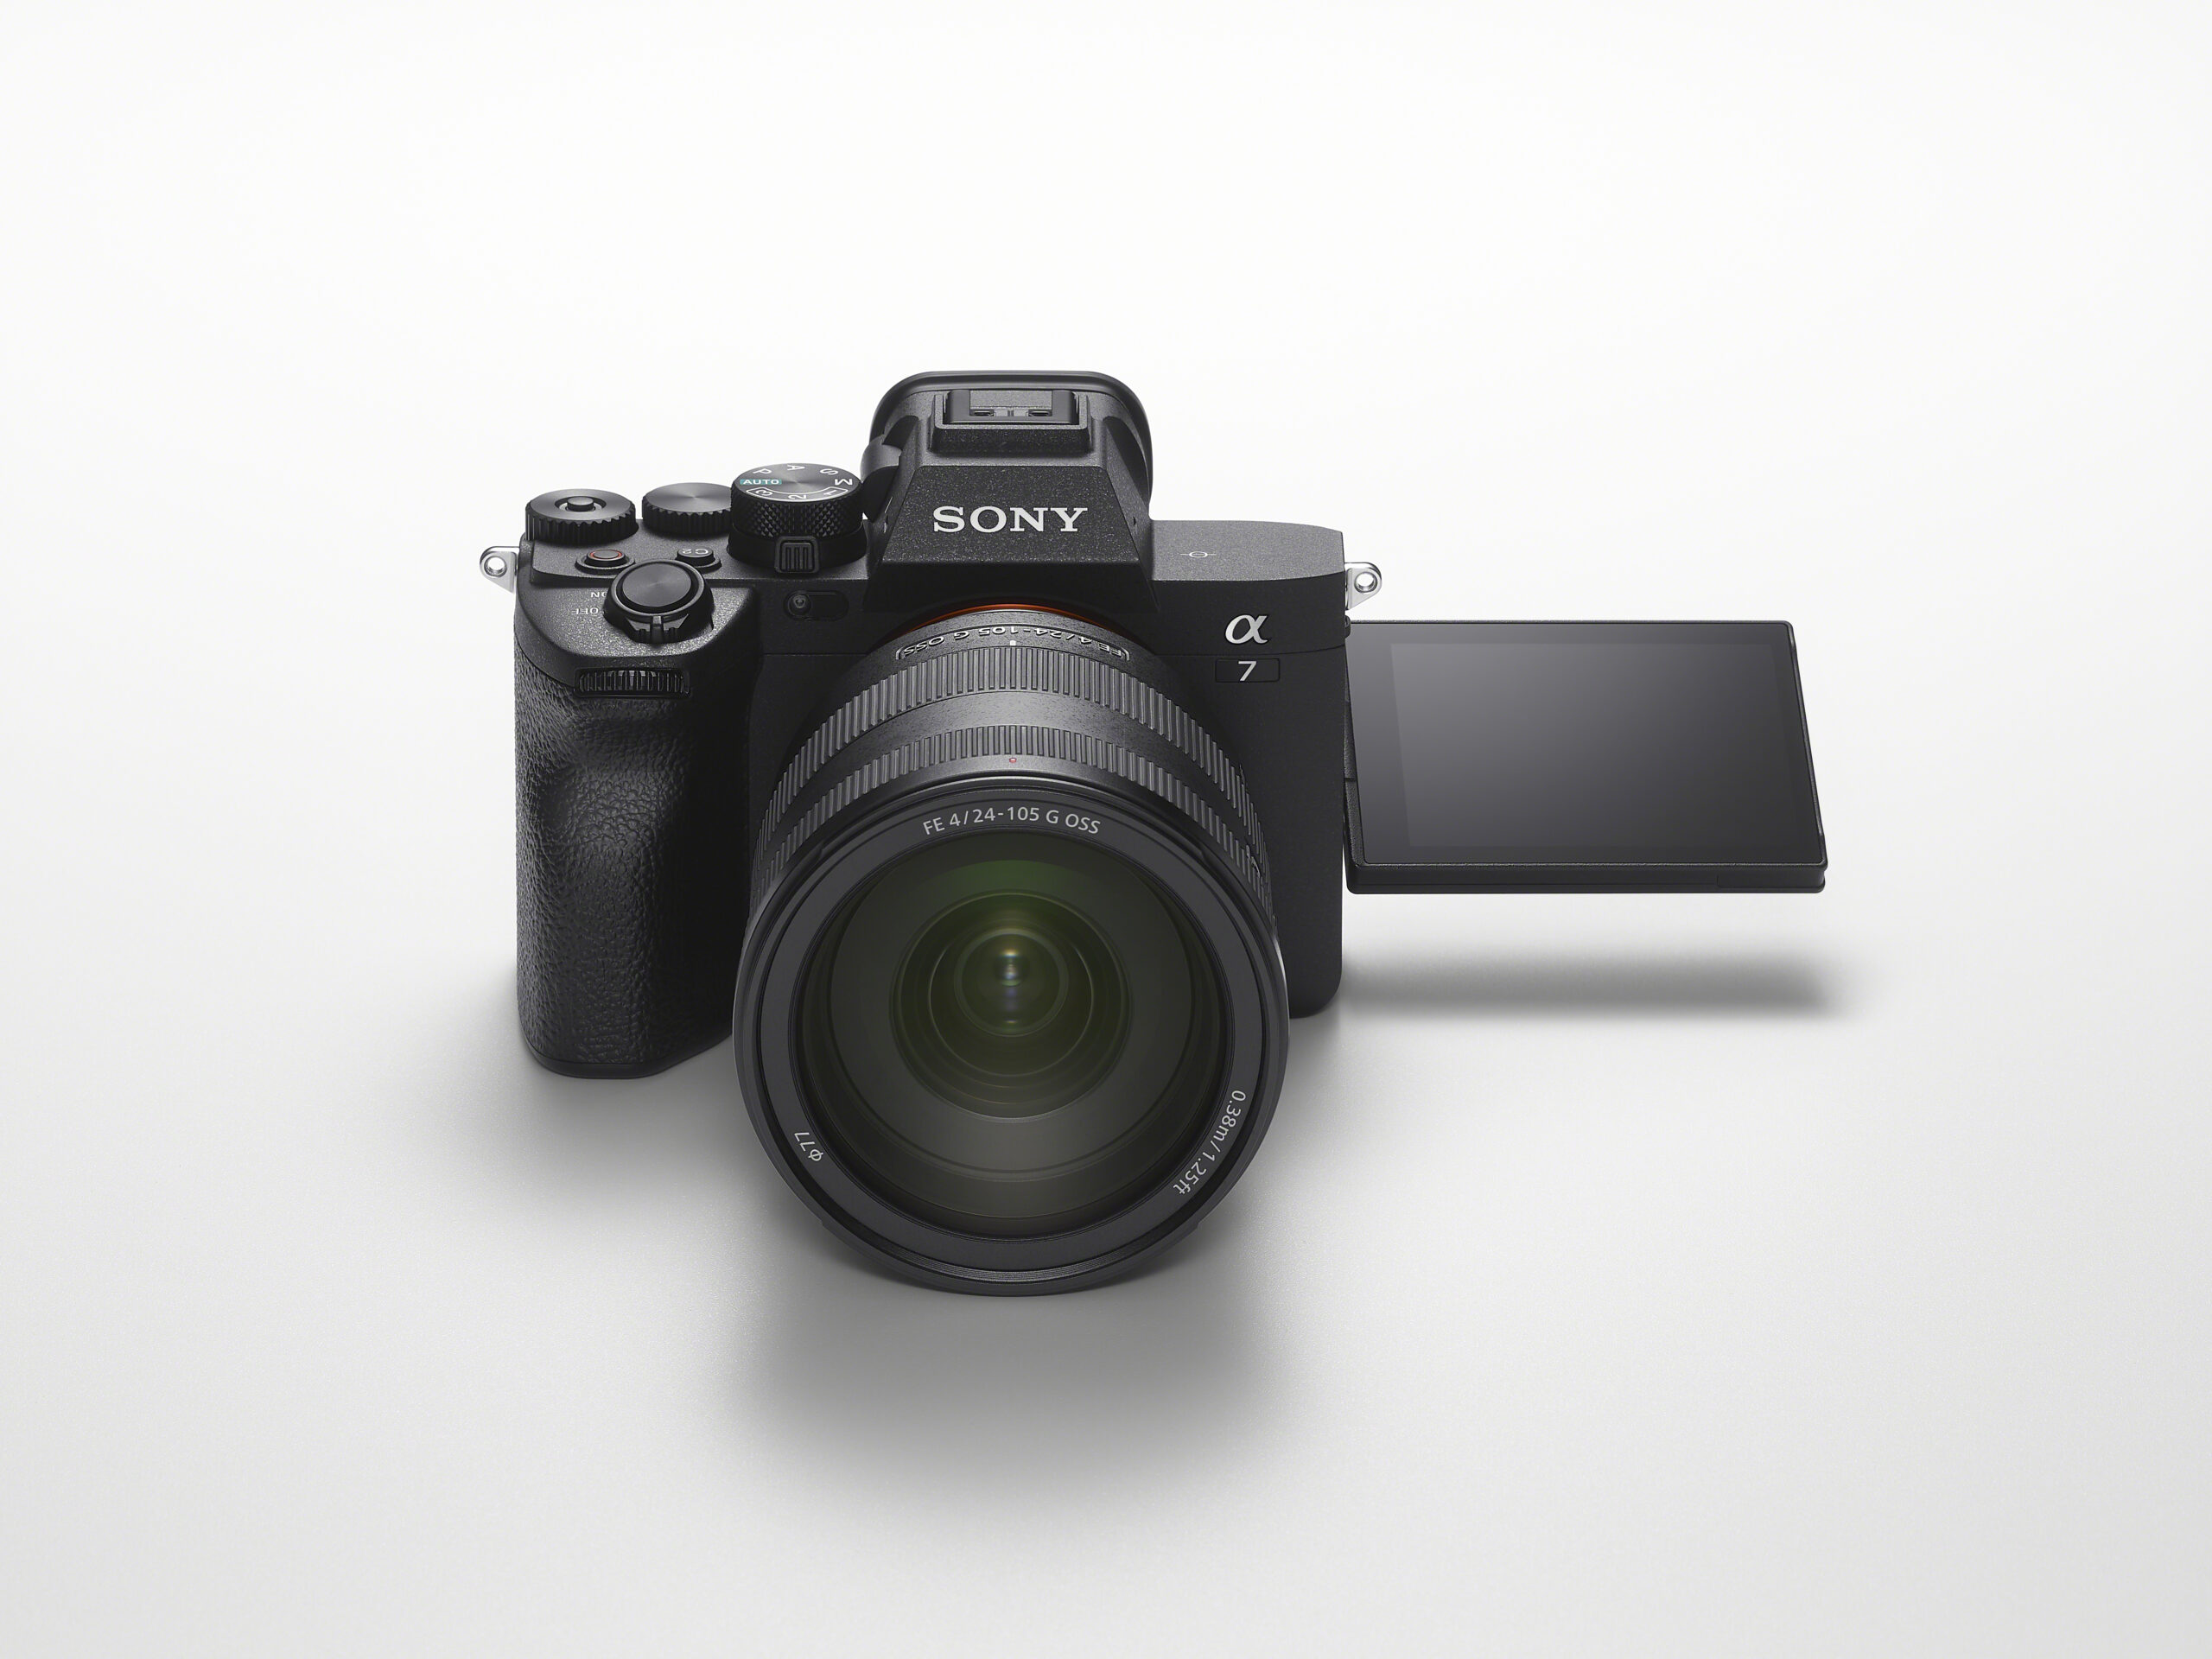 The Sony A7 IV borrows features and tech from much pricier cameras